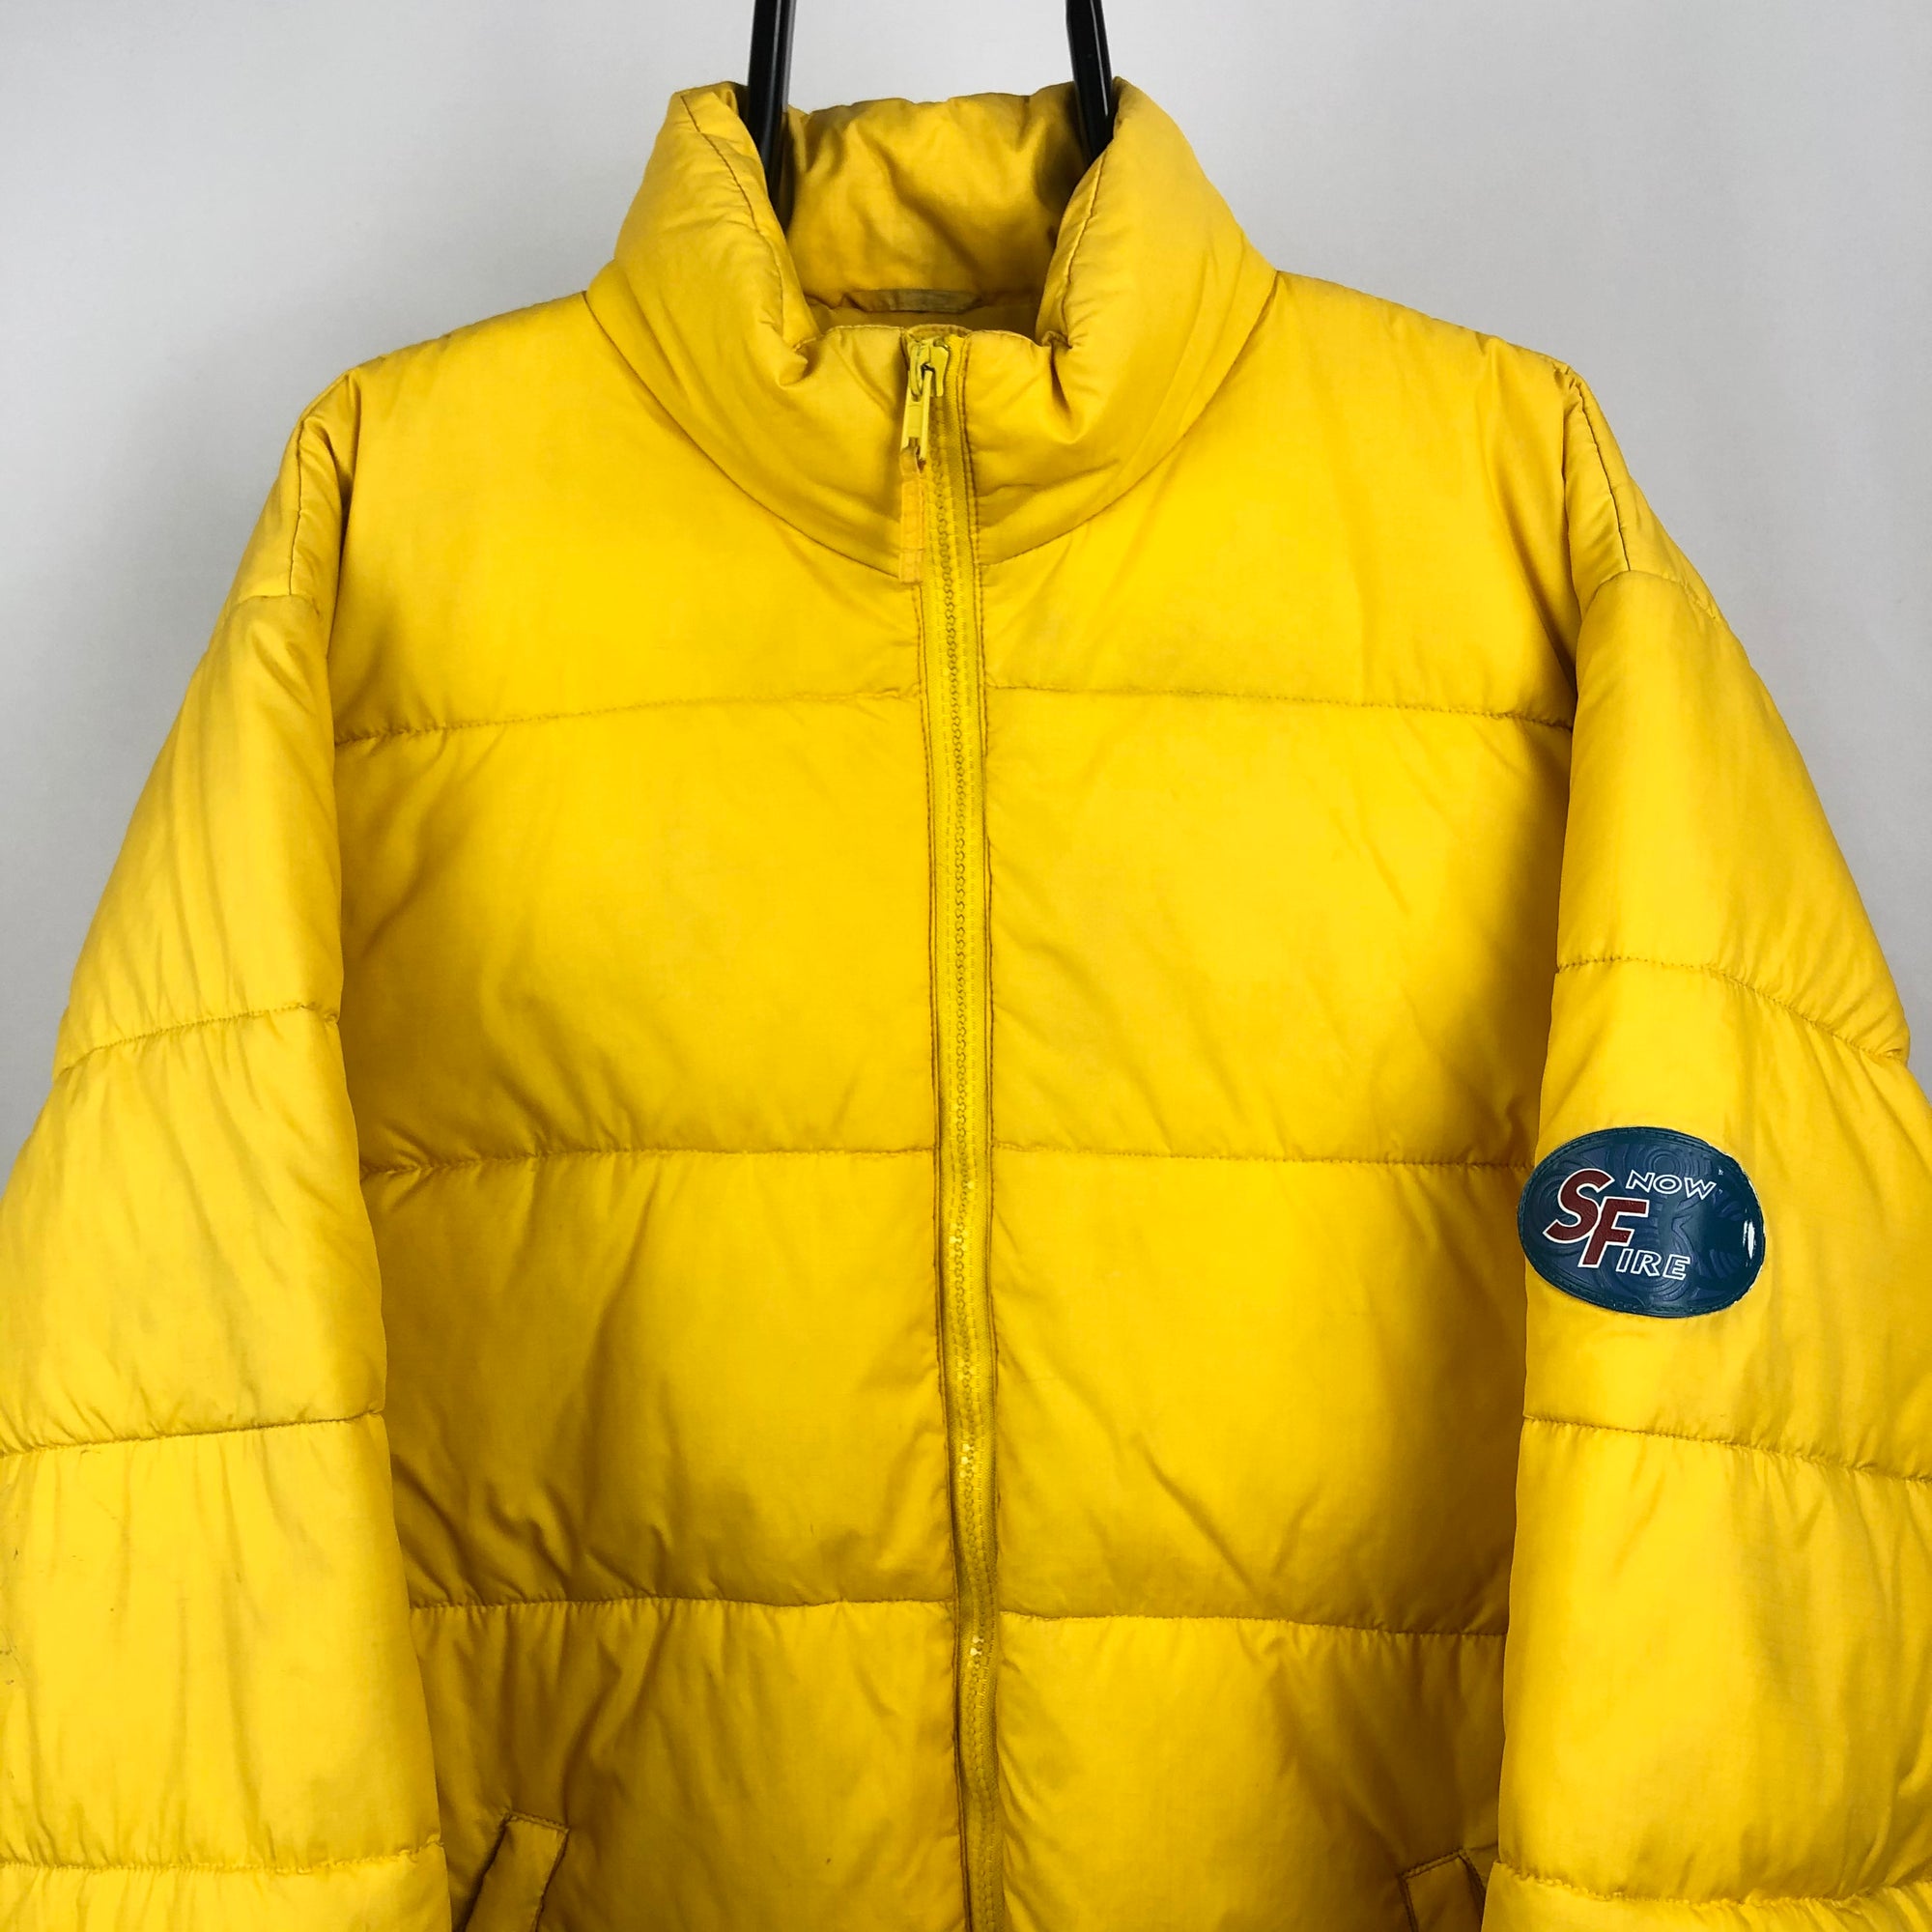 Vintage Snow Fire Down Puffer Jacket in Yellow - Men's Large/Women's XL